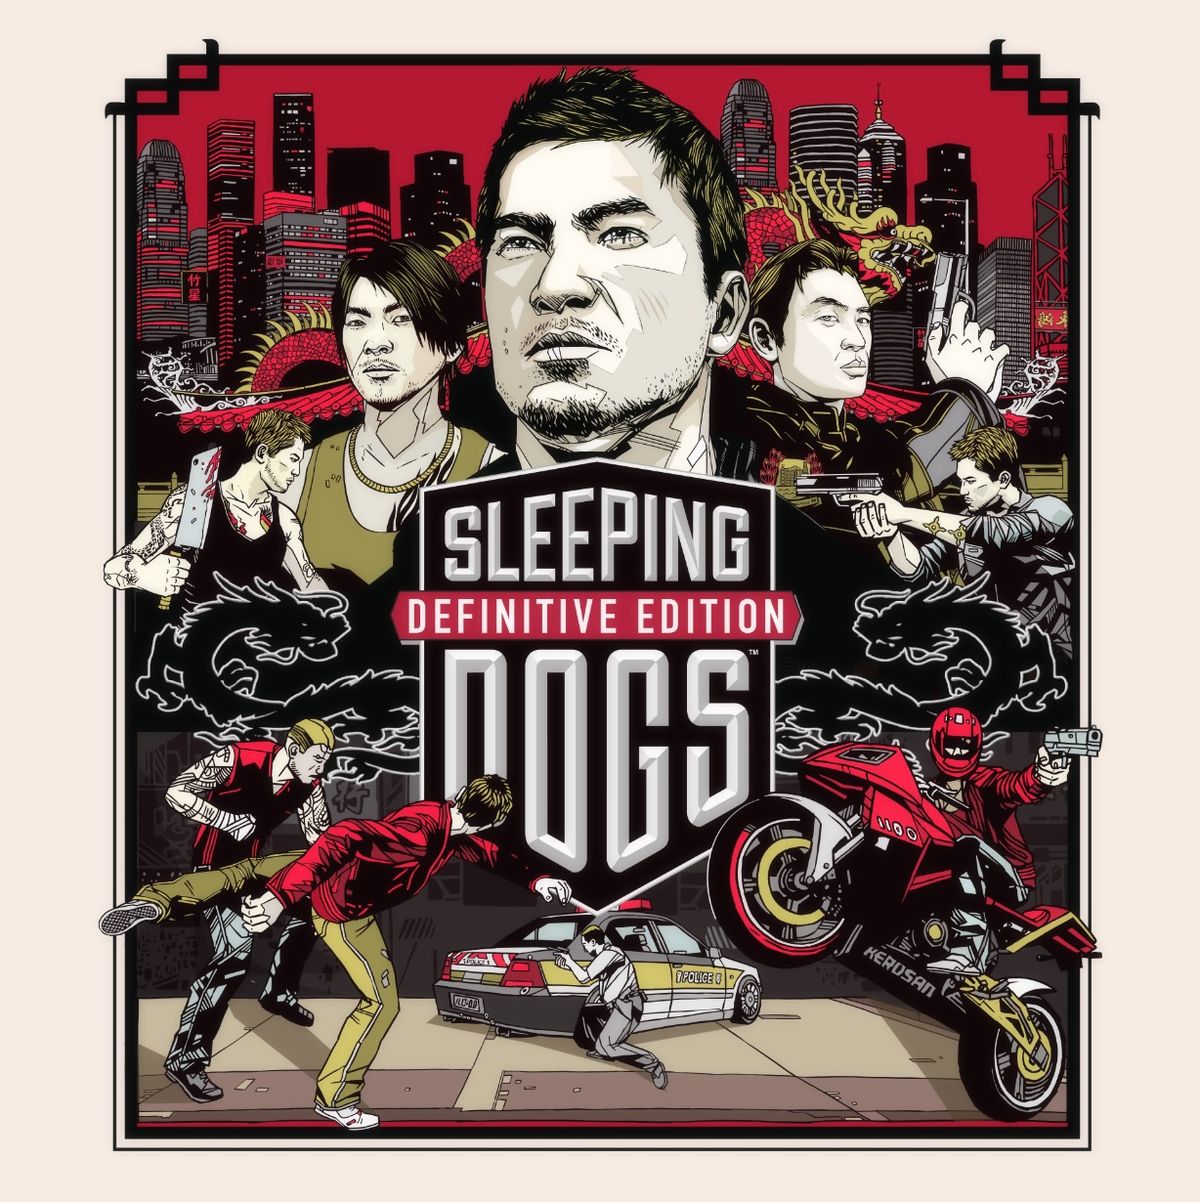 Sleeping Dogs PART 2 'Playthrough [PS3]' TRUE-HD QUALITY 